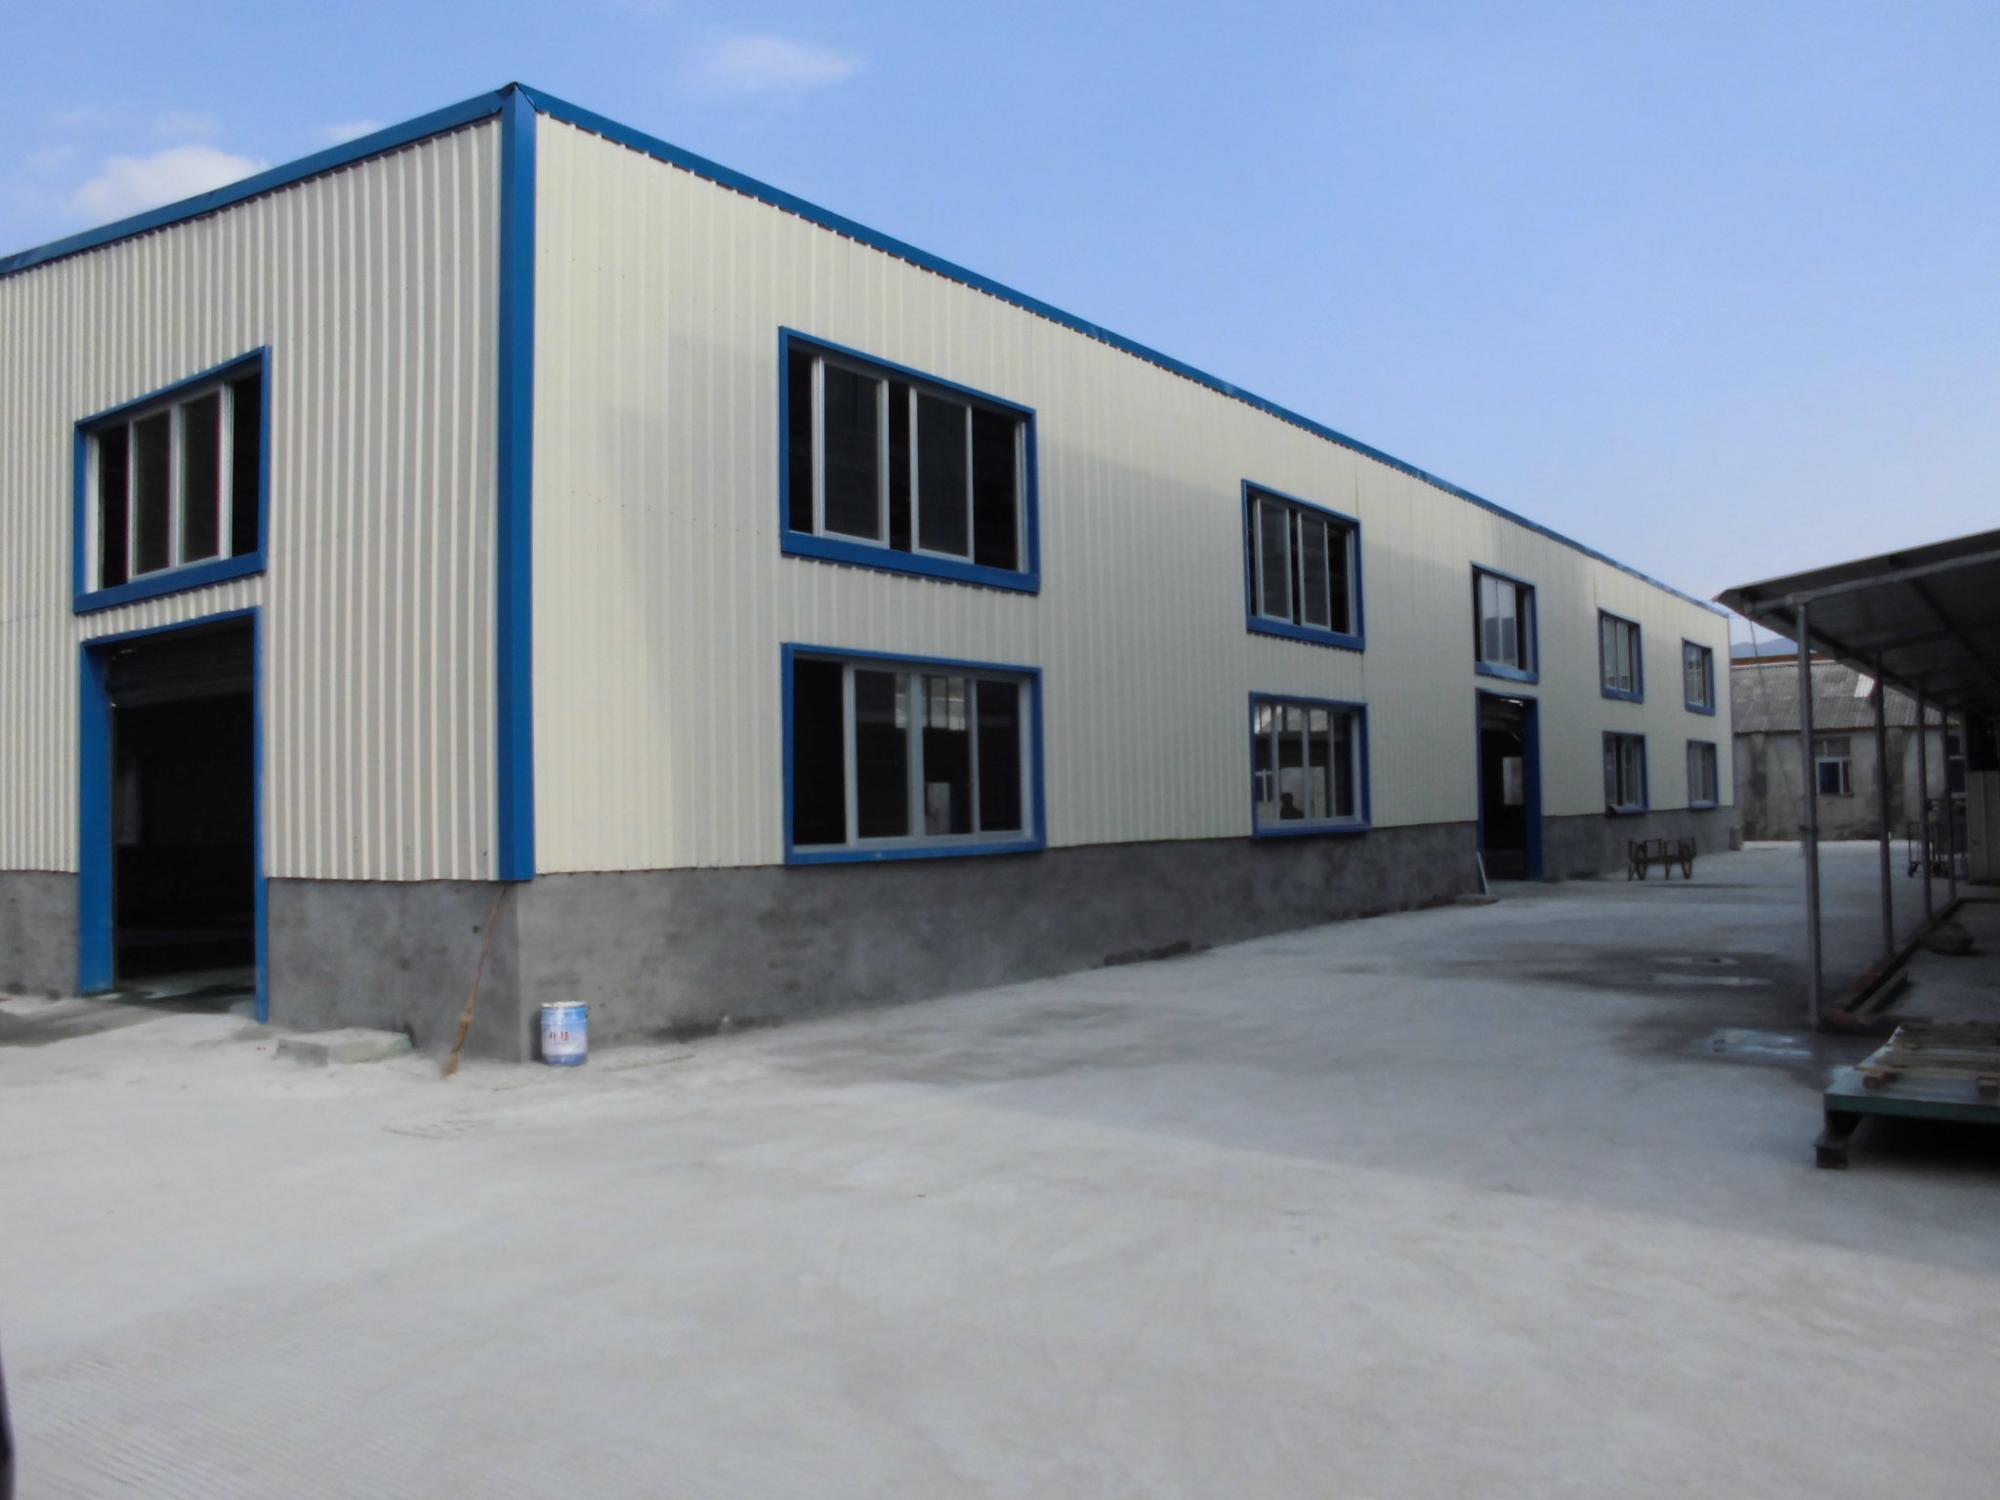 About the CANYANG TRADING CO.,LTD